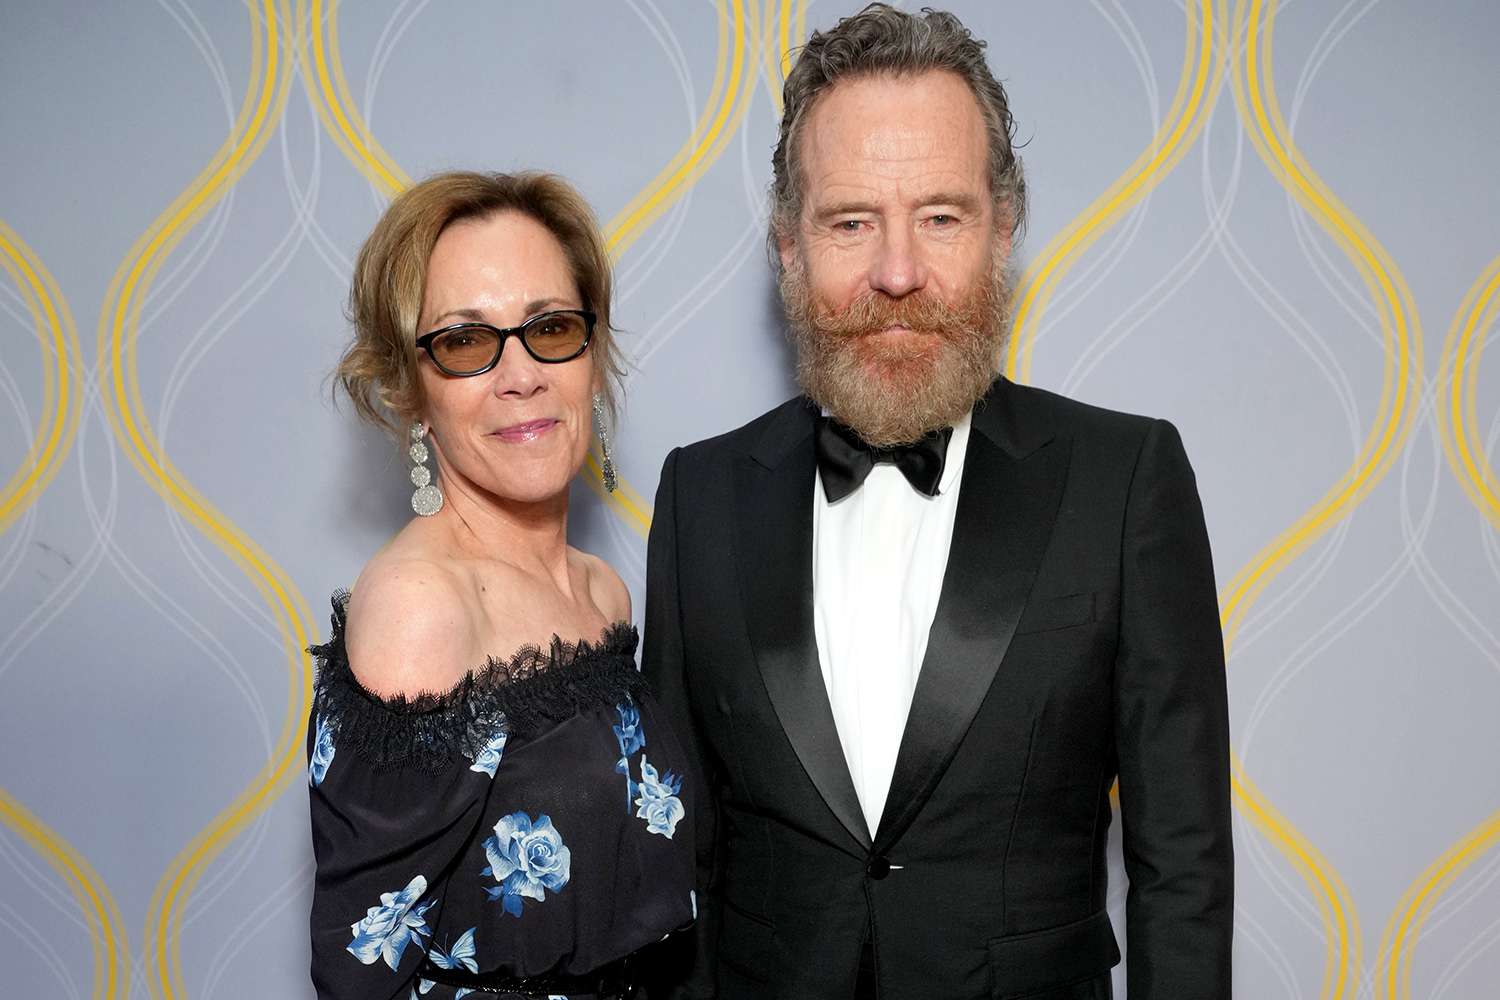 Breaking Bad Actor Bryan Cranston Announces Retirement Plans - Find Out What He's Got in Store! 15